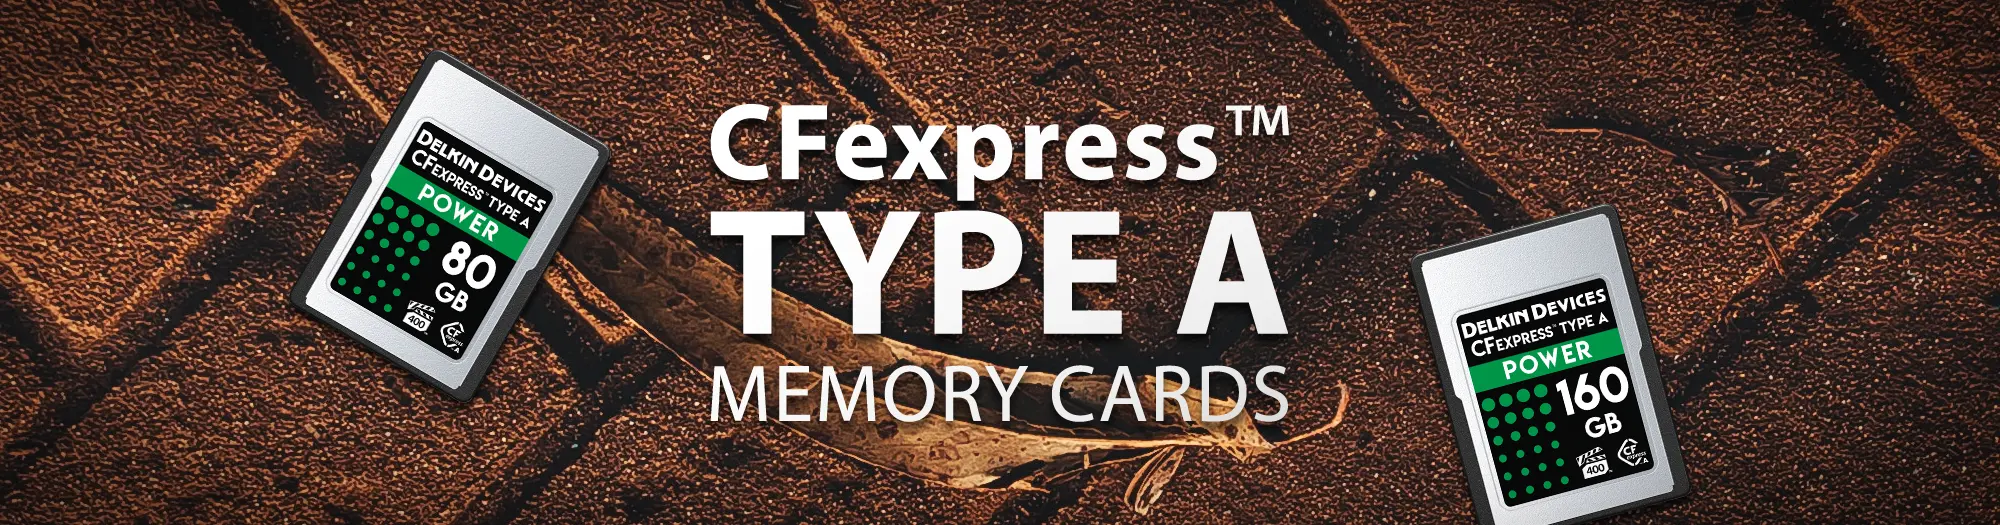 Delkin CFexpress™ Type A Memory Cards - Delkin Devices